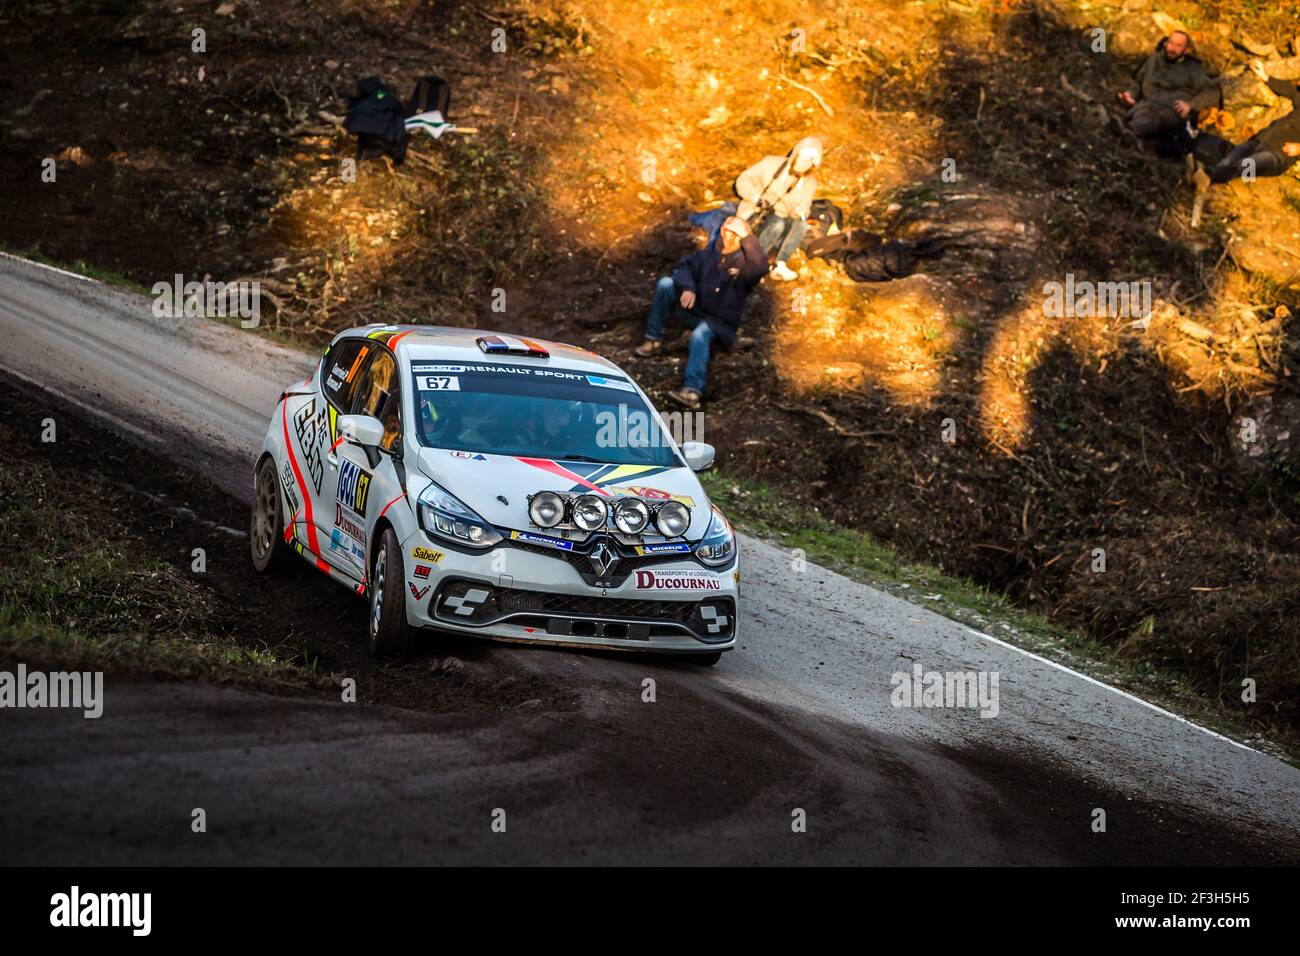 67 ROMANO Patrick and GUERRIERI Patrick, Renault Clio, action during the  2018 French rally championship, rallye du Var from November 22 to 25 at  Sainte Maxime, France - Photo Thomas Fenetre / DPPI Stock Photo - Alamy